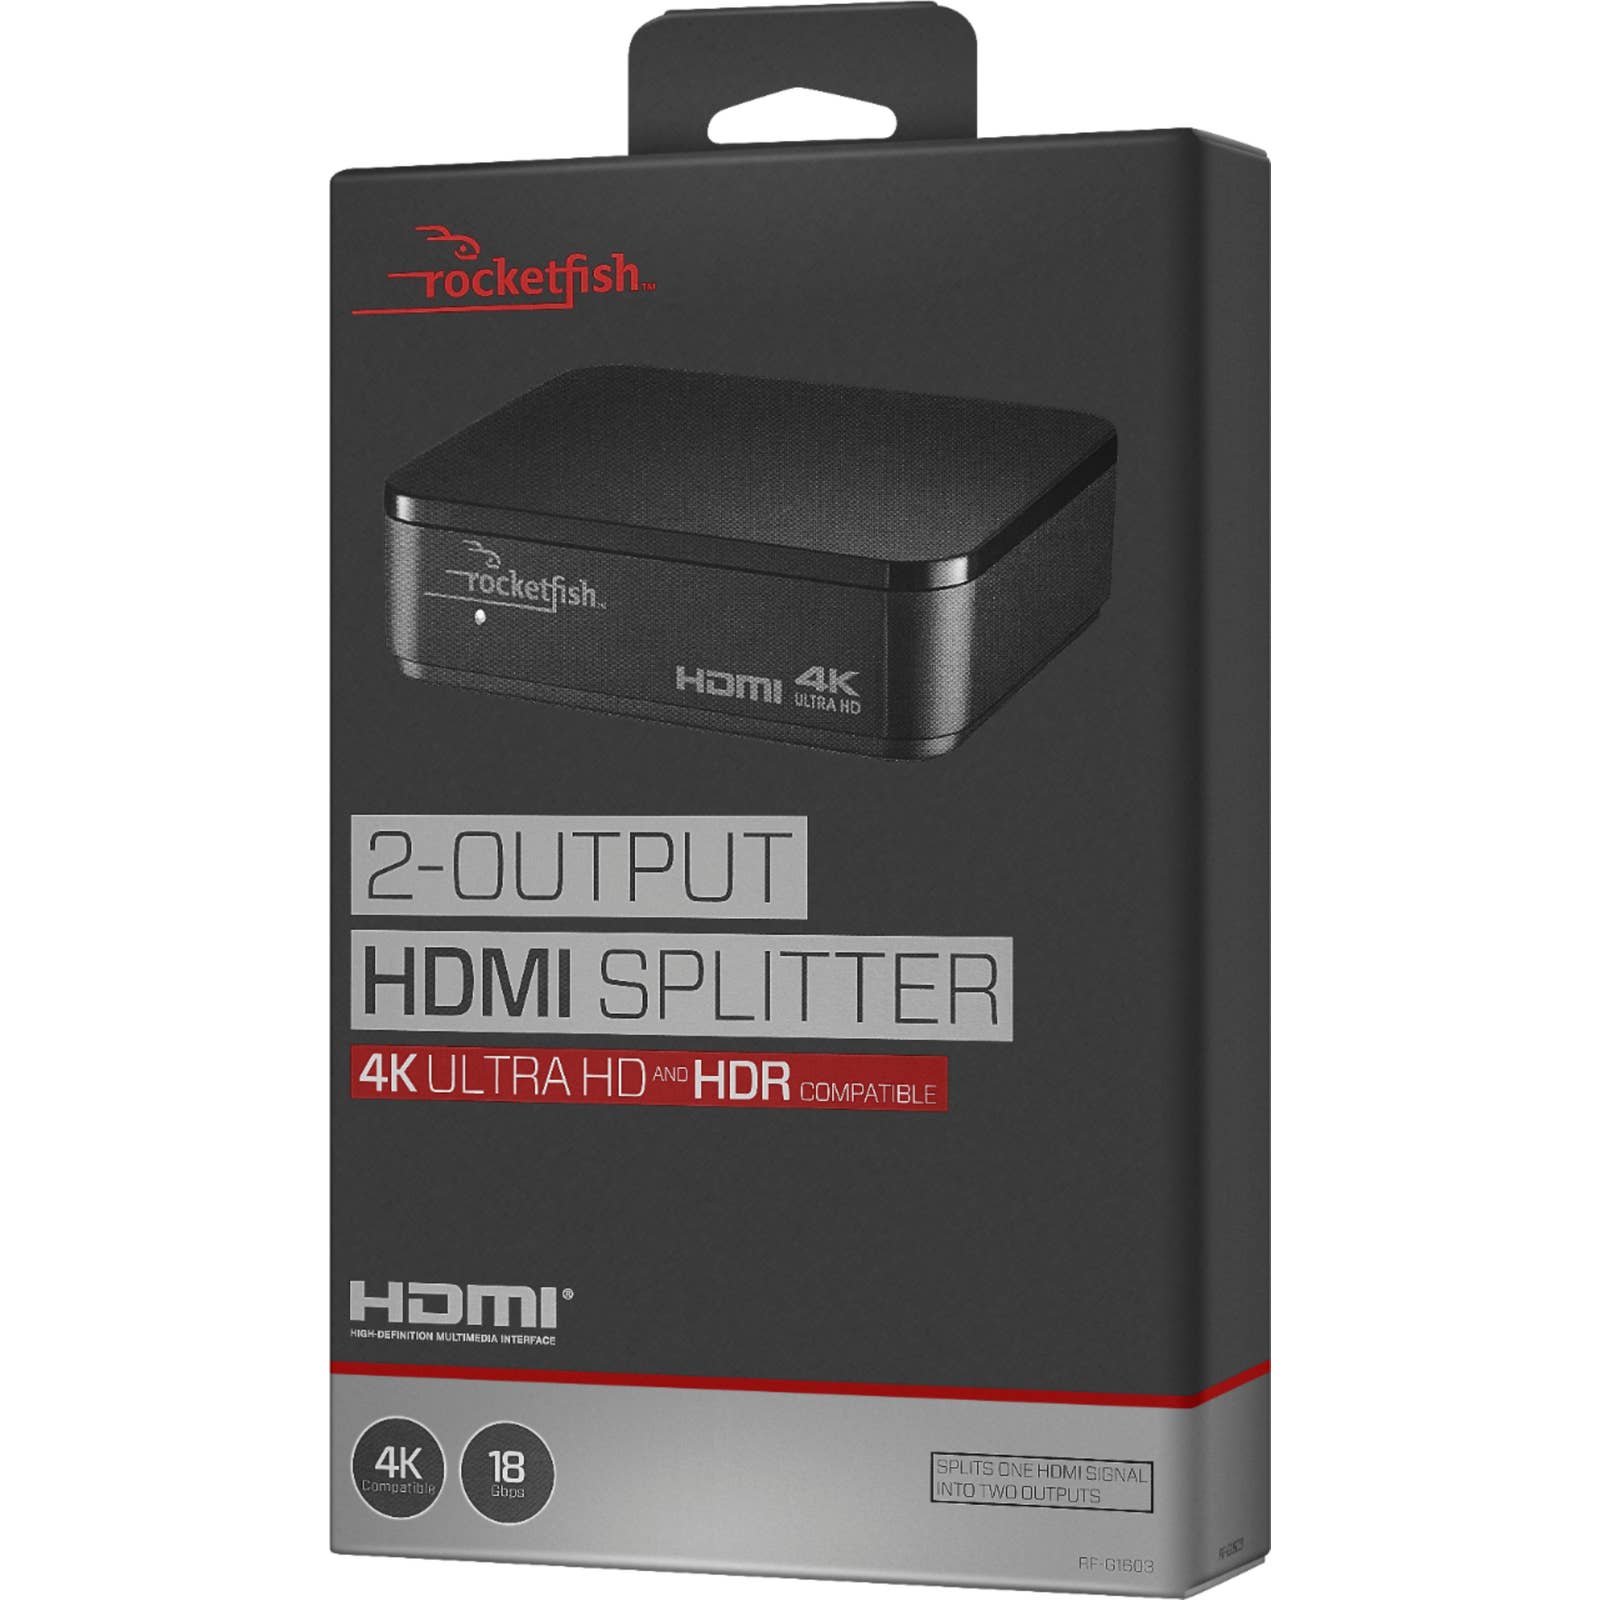 Rocketfish™ - RF-G1603 2-Output HDMI Splitter with 4K and HDR Pass-Through - Black